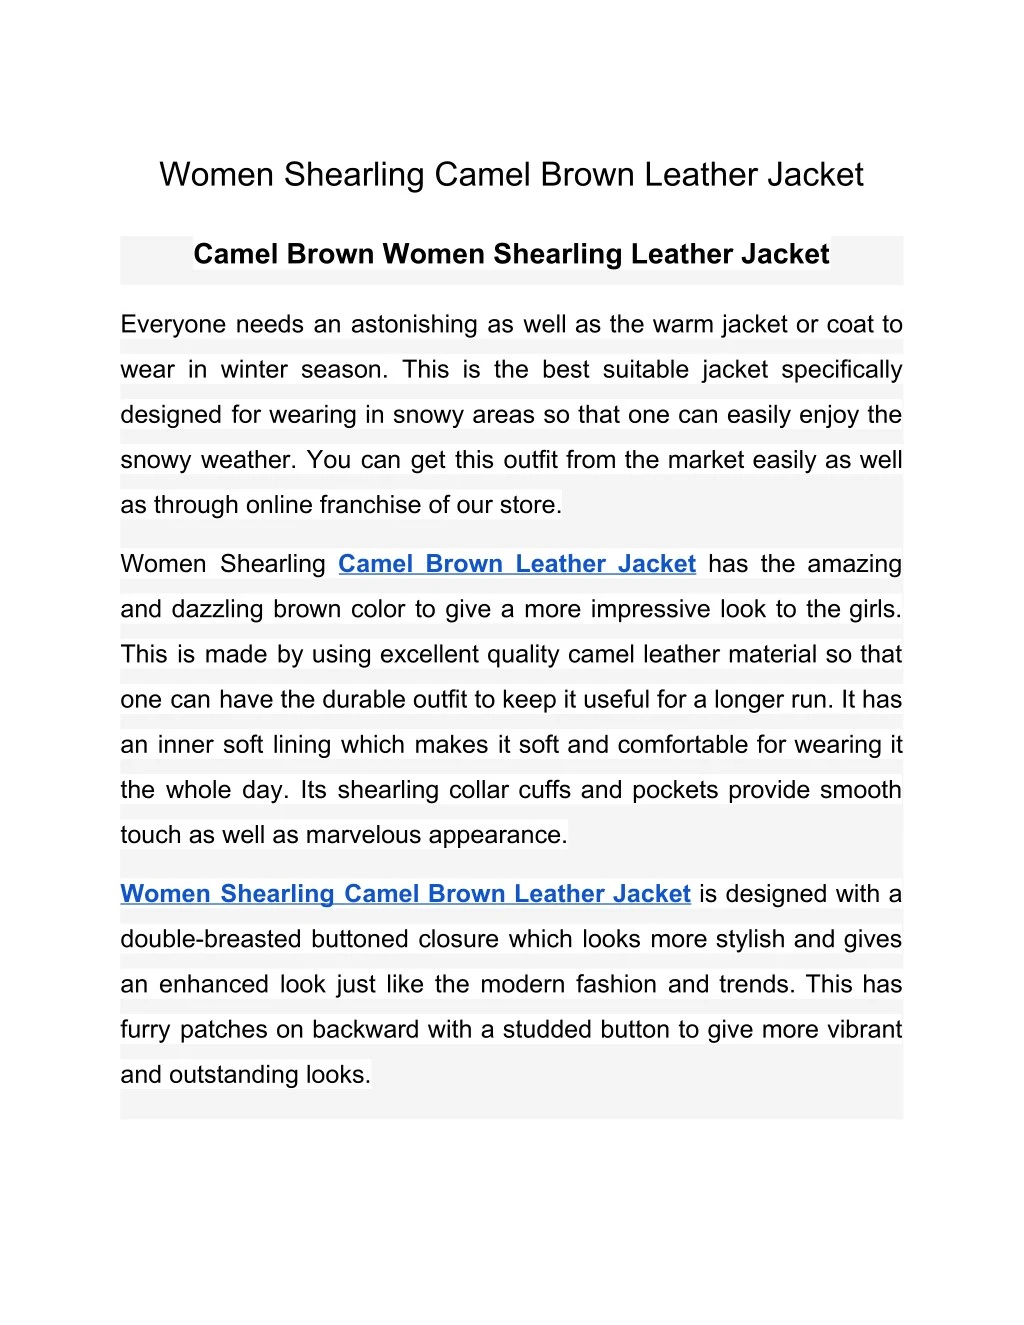 women shearling camel brown leather jacket